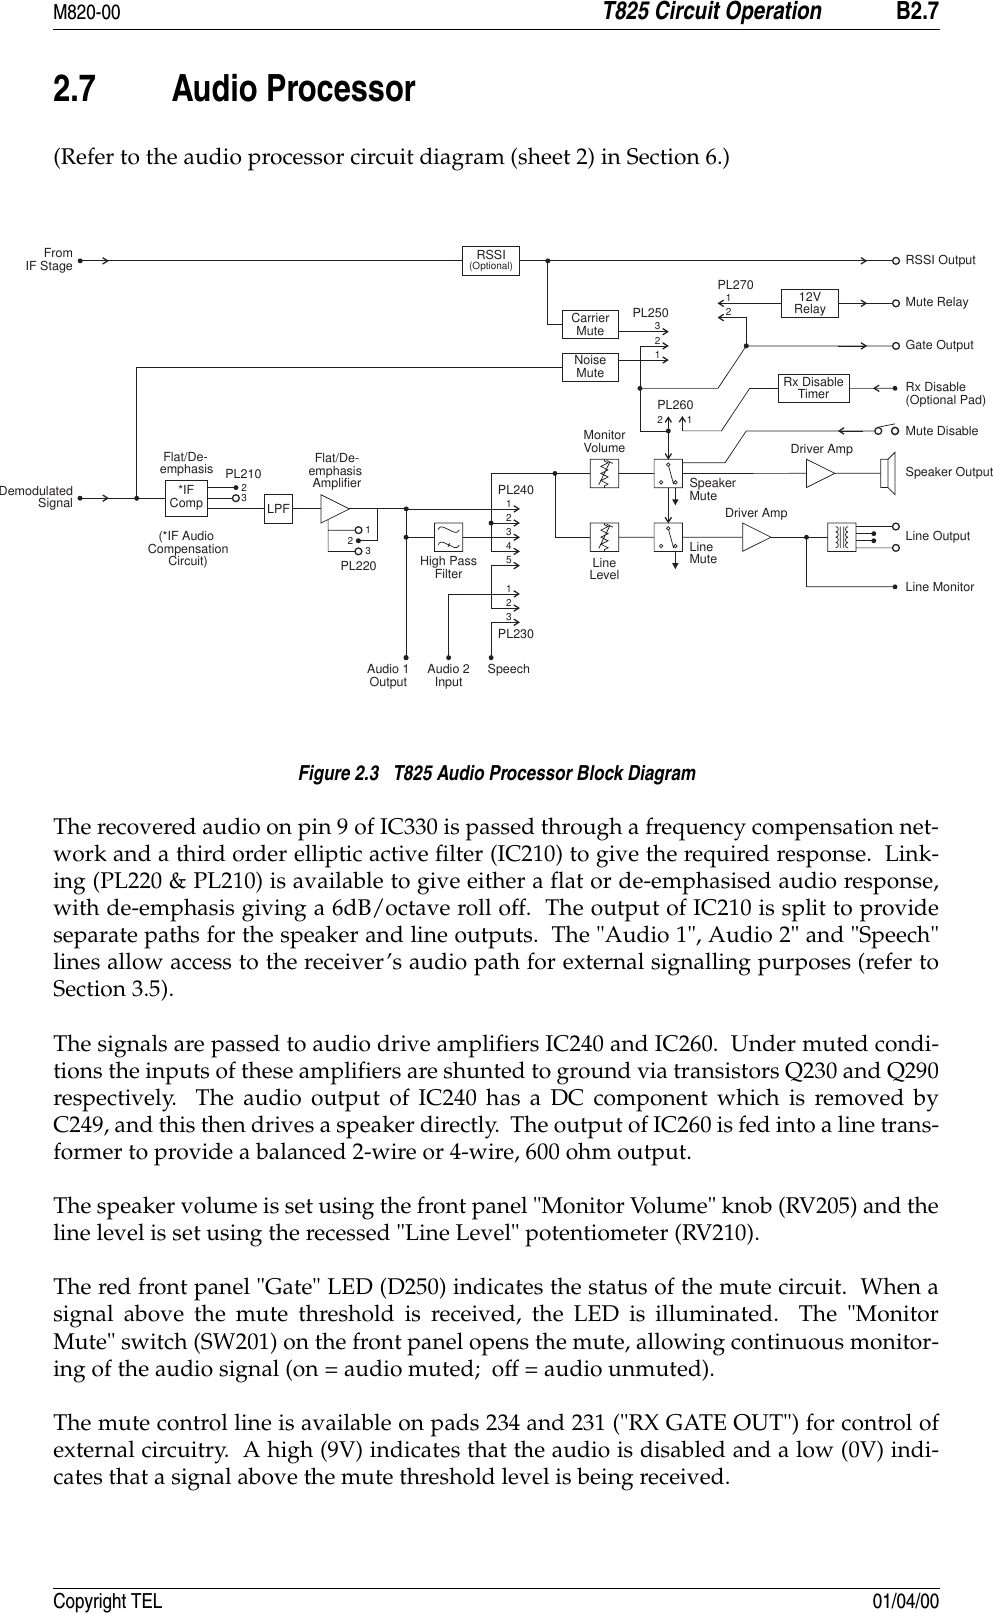 M820-00 T825 Circuit Operation B2.7Copyright TEL 01/04/002.7 Audio Processor(Refer to the audio processor circuit diagram (sheet 2) in Section 6.)Figure 2.3   T825 Audio Processor Block DiagramThe recovered audio on pin 9 of IC330 is passed through a frequency compensation net-work and a third order elliptic active filter (IC210) to give the required response.  Link-ing (PL220 &amp; PL210) is available to give either a flat or de-emphasised audio response,with de-emphasis giving a 6dB/octave roll off.  The output of IC210 is split to provideseparate paths for the speaker and line outputs.  The &quot;Audio 1&quot;, Audio 2&quot; and &quot;Speech&quot;lines allow access to the receiver’s audio path for external signalling purposes (refer toSection 3.5).The signals are passed to audio drive amplifiers IC240 and IC260.  Under muted condi-tions the inputs of these amplifiers are shunted to ground via transistors Q230 and Q290respectively.  The audio output of IC240 has a DC component which is removed byC249, and this then drives a speaker directly.  The output of IC260 is fed into a line trans-former to provide a balanced 2-wire or 4-wire, 600 ohm output.The speaker volume is set using the front panel &quot;Monitor Volume&quot; knob (RV205) and theline level is set using the recessed &quot;Line Level&quot; potentiometer (RV210).  The red front panel &quot;Gate&quot; LED (D250) indicates the status of the mute circuit.  When asignal above the mute threshold is received, the LED is illuminated.  The &quot;MonitorMute&quot; switch (SW201) on the front panel opens the mute, allowing continuous monitor-ing of the audio signal (on = audio muted;  off = audio unmuted).The mute control line is available on pads 234 and 231 (&quot;RX GATE OUT&quot;) for control ofexternal circuitry.  A high (9V) indicates that the audio is disabled and a low (0V) indi-cates that a signal above the mute threshold level is being received.FromIF StageDemodulatedSignal(*IF AudioCompensationCircuit)Driver AmpLine Output12VRelaySpeechAudio 1Output Audio 2InputHigh PassFilterSpeakerMuteLineMuteCarrierMuteRSSI(Optional)Rx DisableTimerNoiseMutePL260PL250PL270RSSI OutputMute RelayGate OutputRx Disable(Optional Pad)Mute DisableSpeaker OutputLine Monitor121221315223341PL240PL230Driver AmpFlat/De-emphasisLPFPL21023Flat/De-emphasisAmplifierPL220123*IFCompMonitorVolumeLineLevel